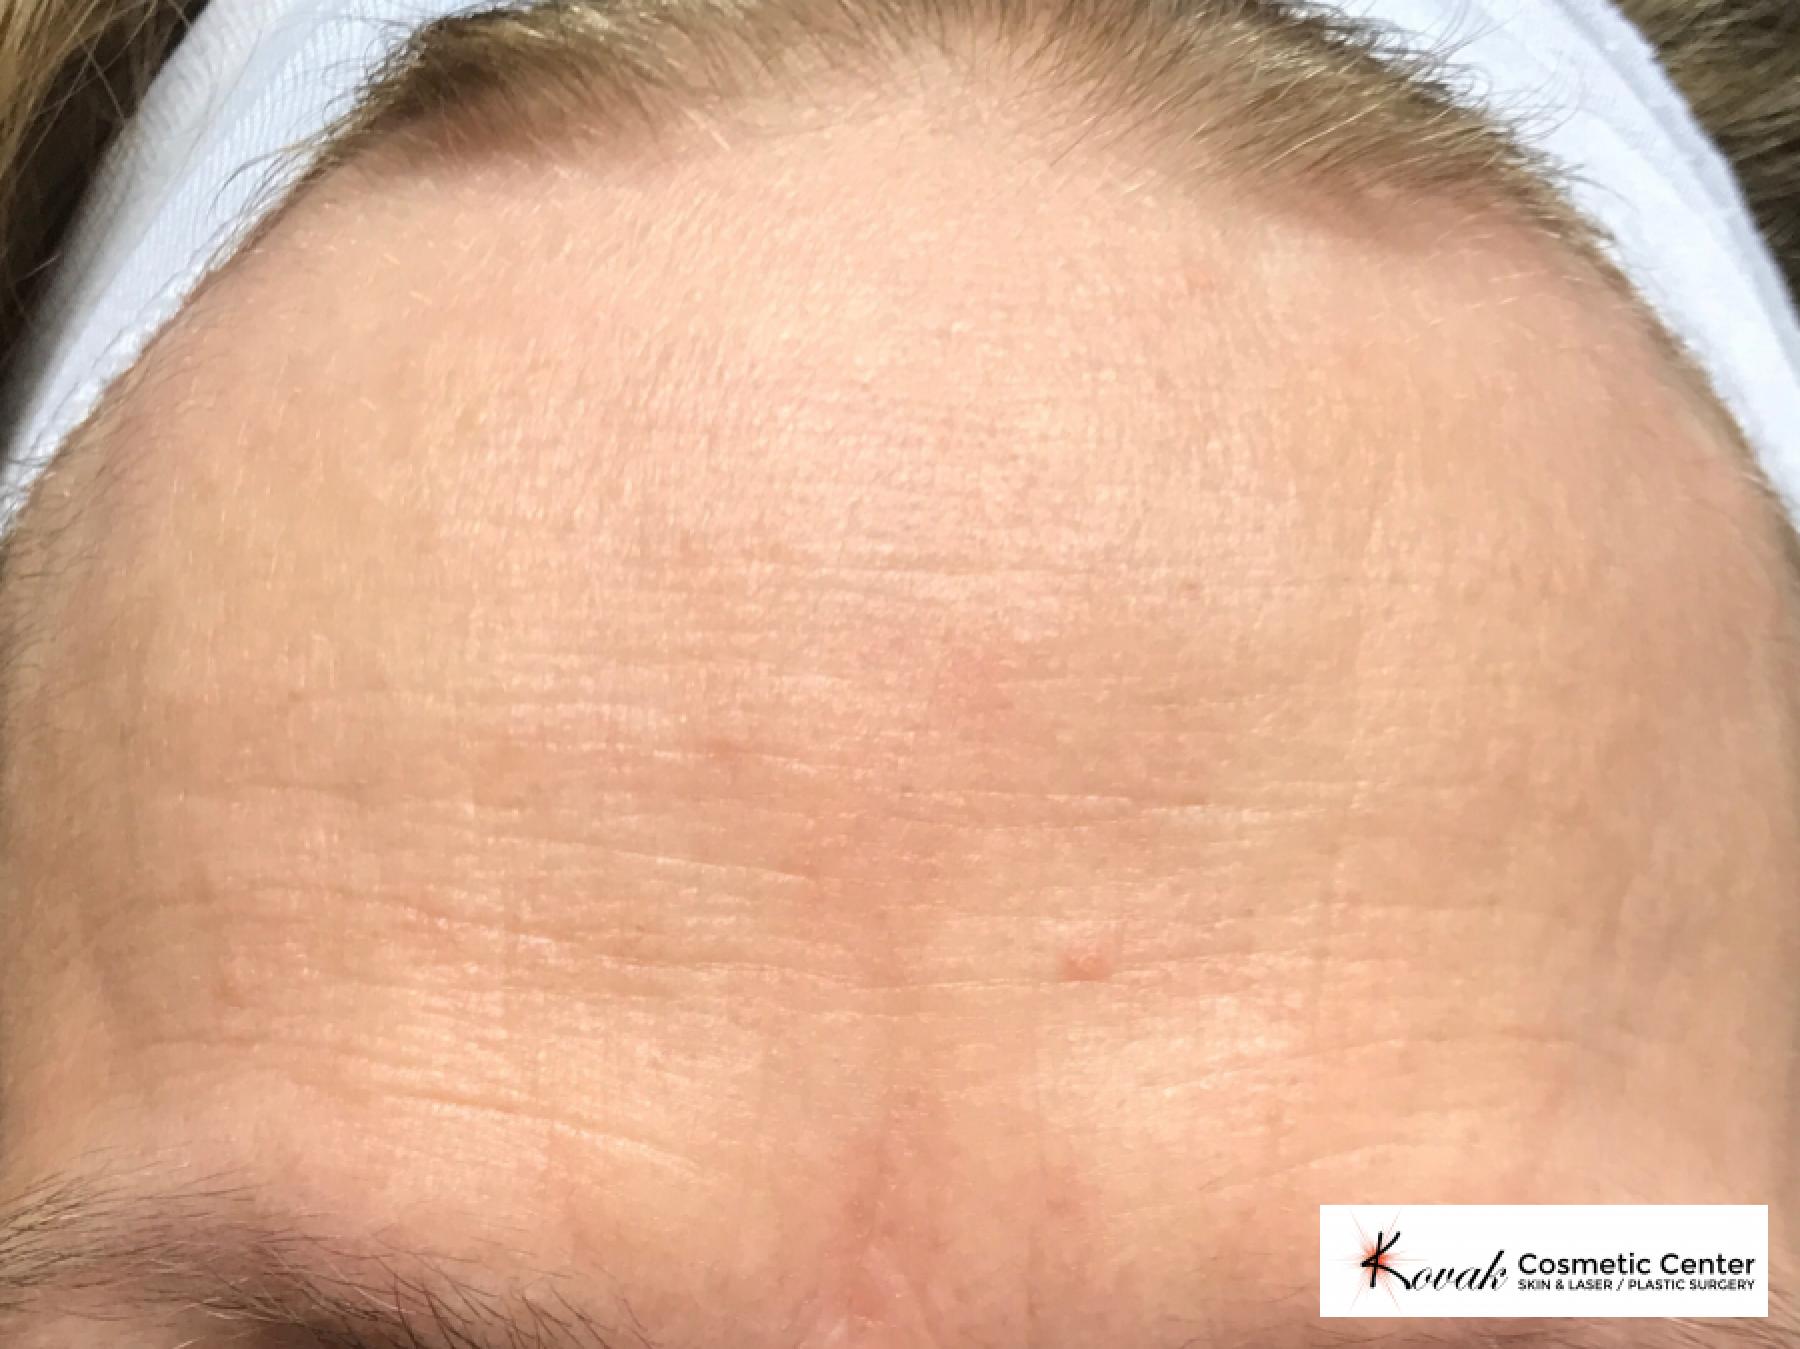 Forehead lines treated with Restylane Silk on 60 year old female - After  